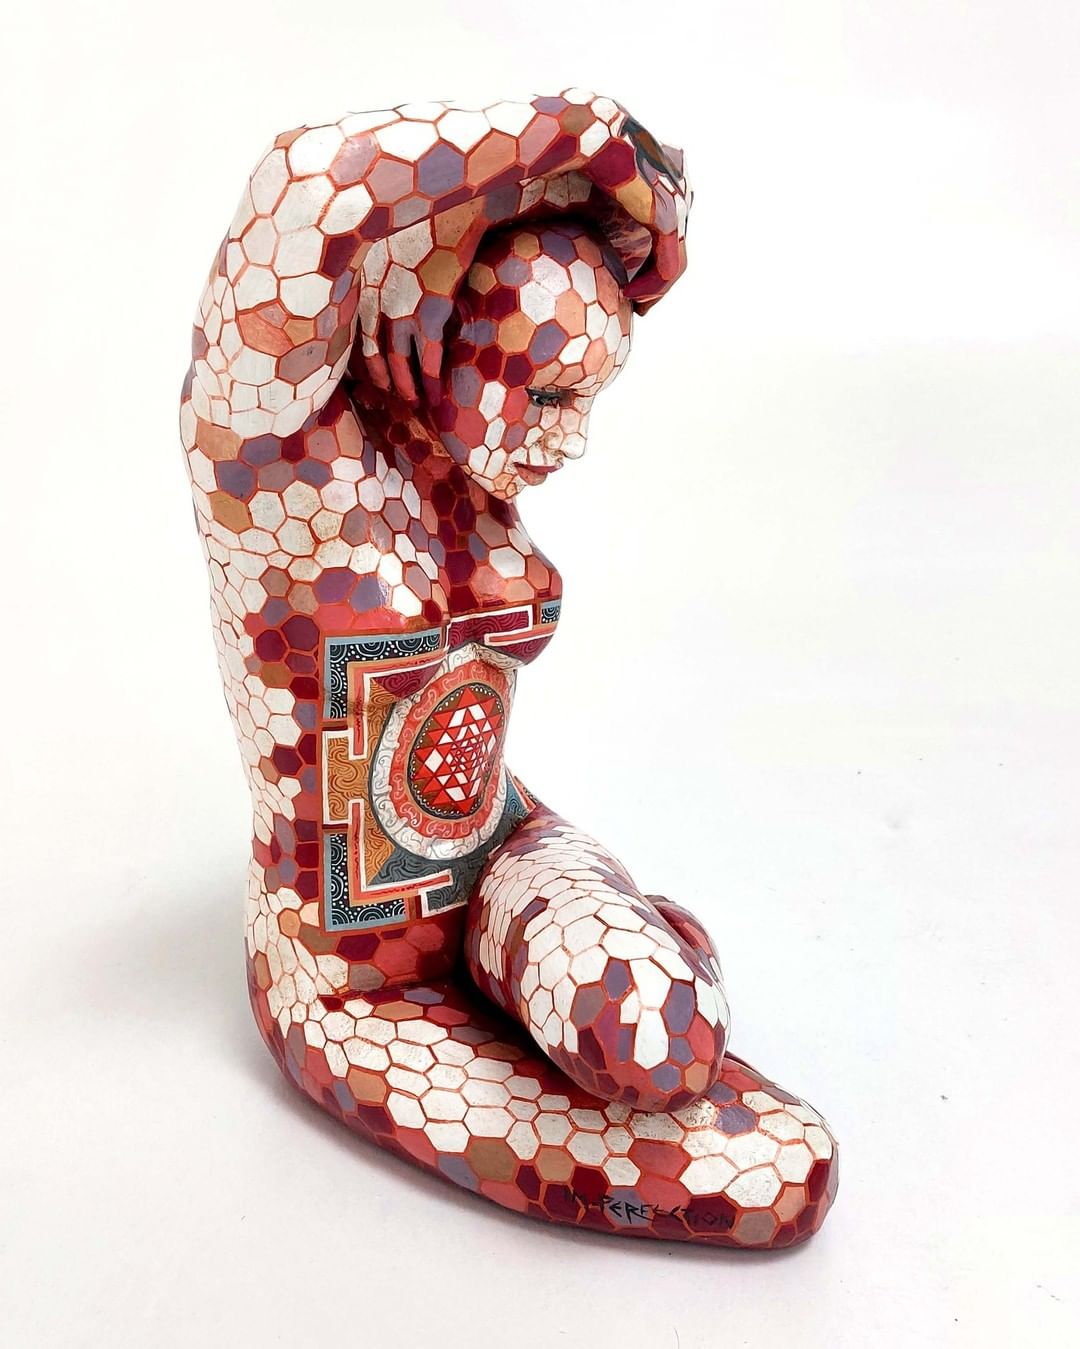 Expressive Figurative Sculptures Gorgeously Covered By Colorful Patterns By Paola Epifani Rabarama 22